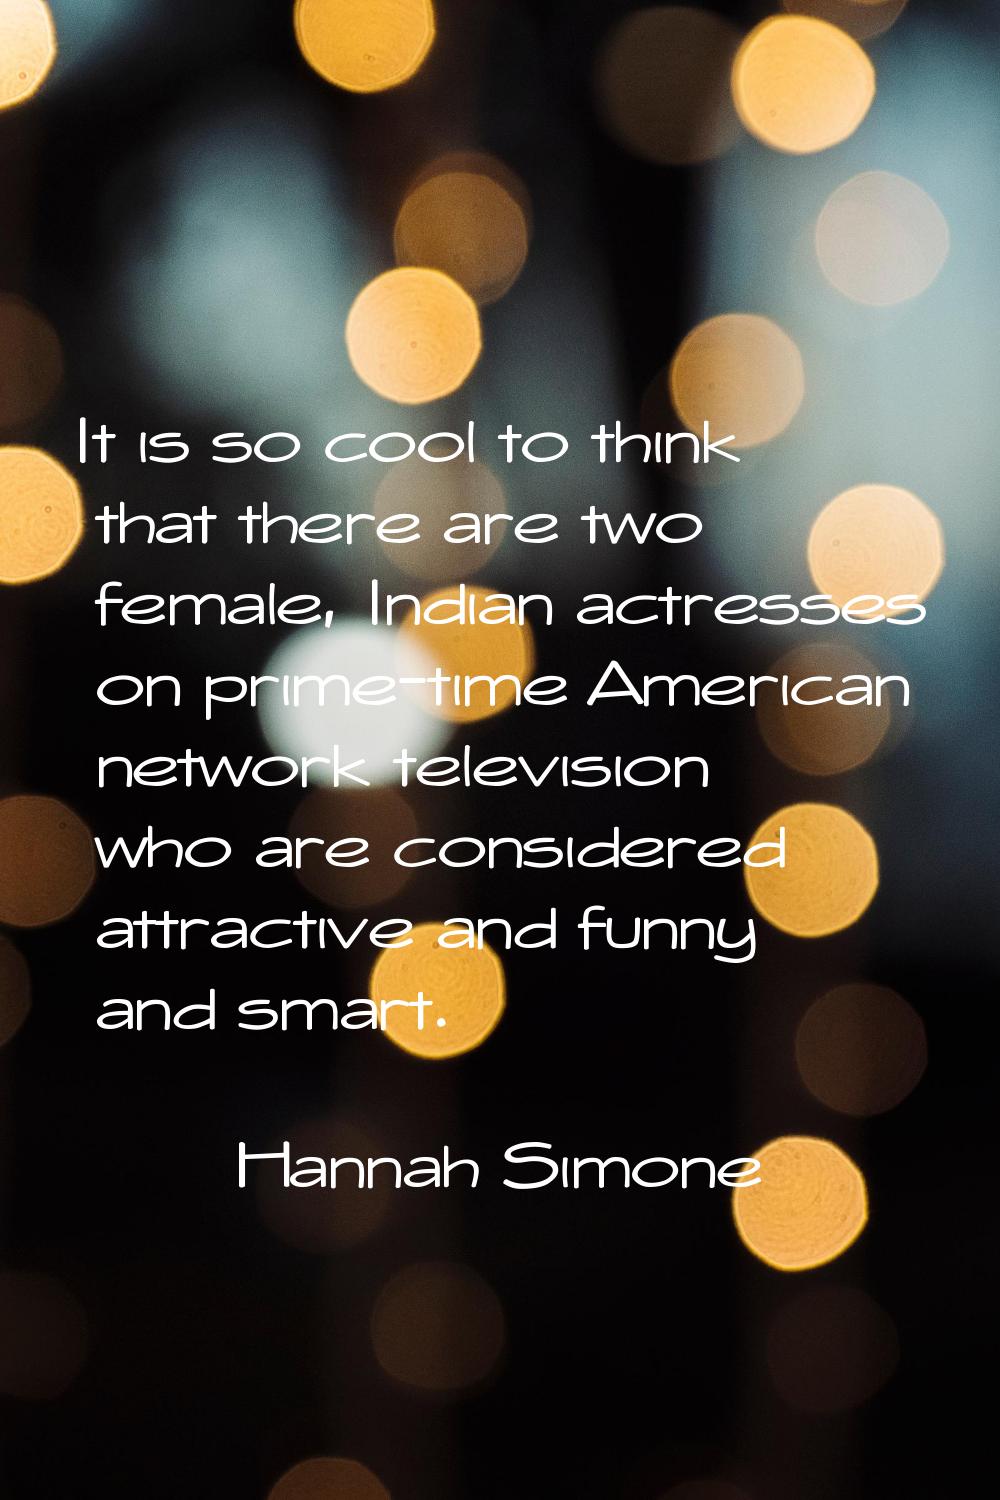 It is so cool to think that there are two female, Indian actresses on prime-time American network t